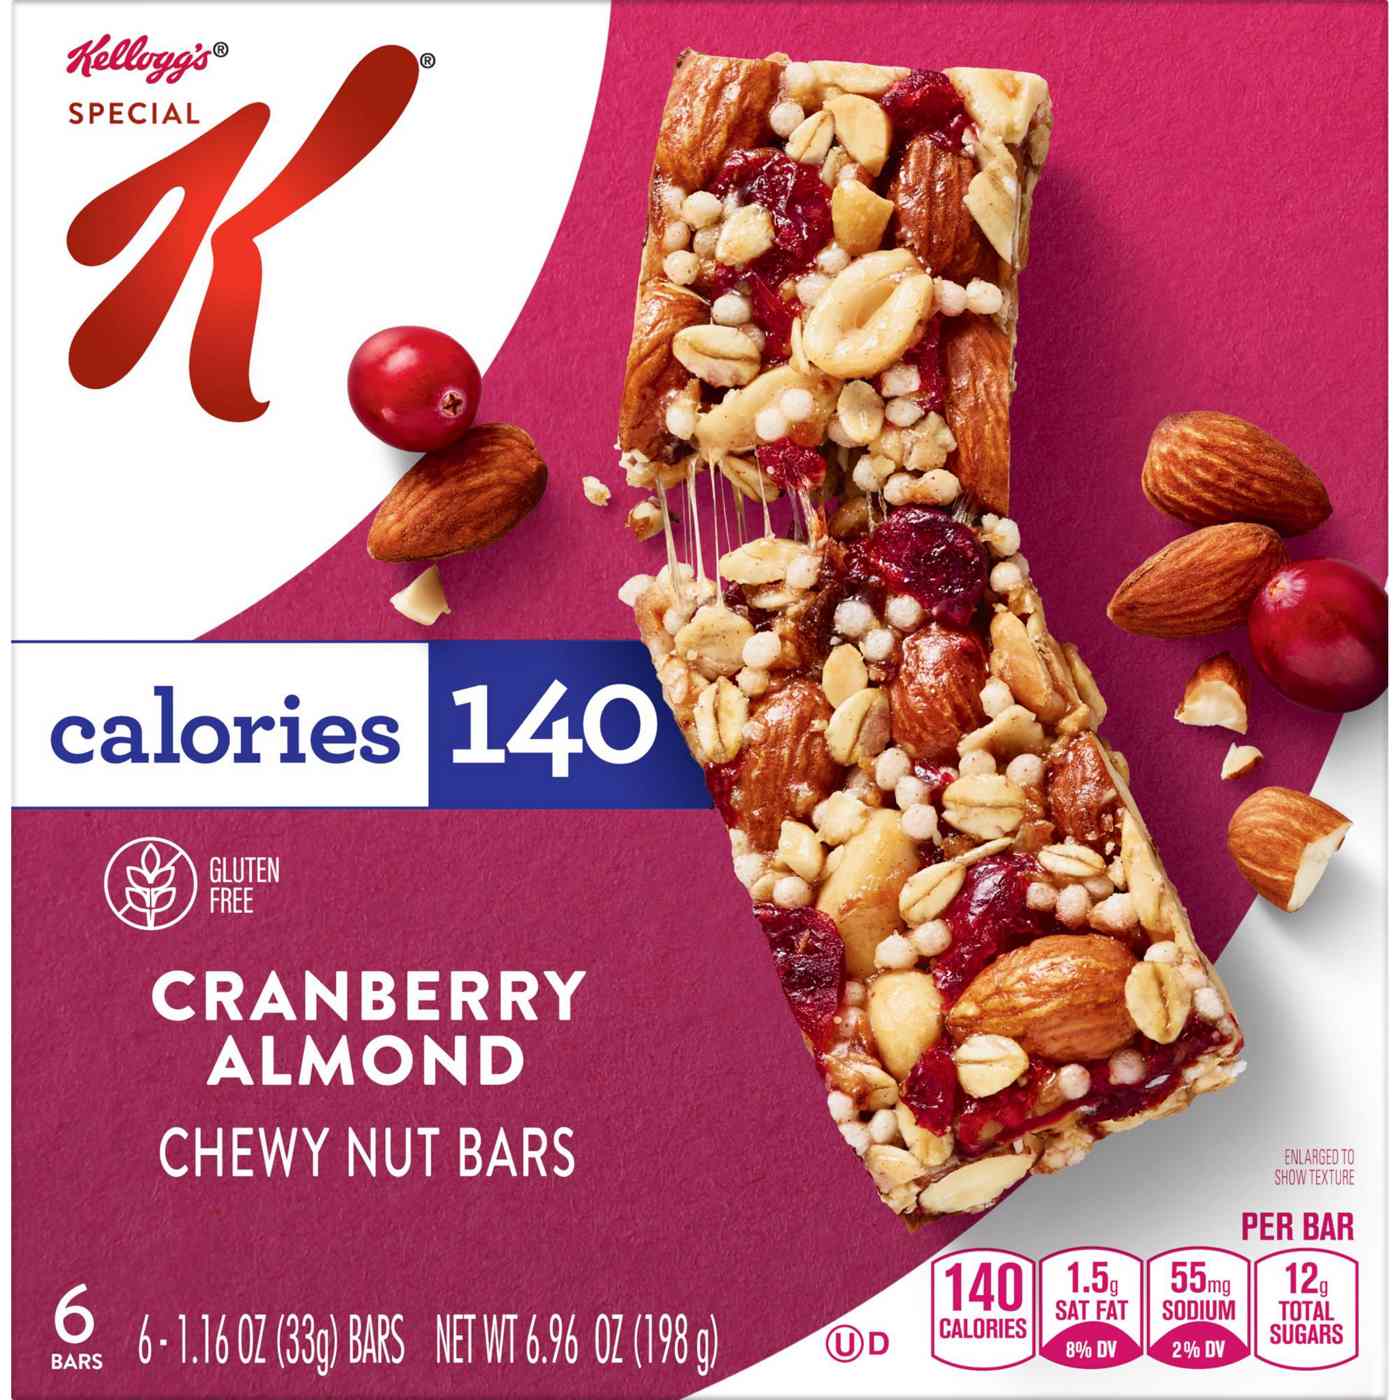 Kellogg's Special K Cranberry Almond Chewy Nut Bars; image 1 of 2